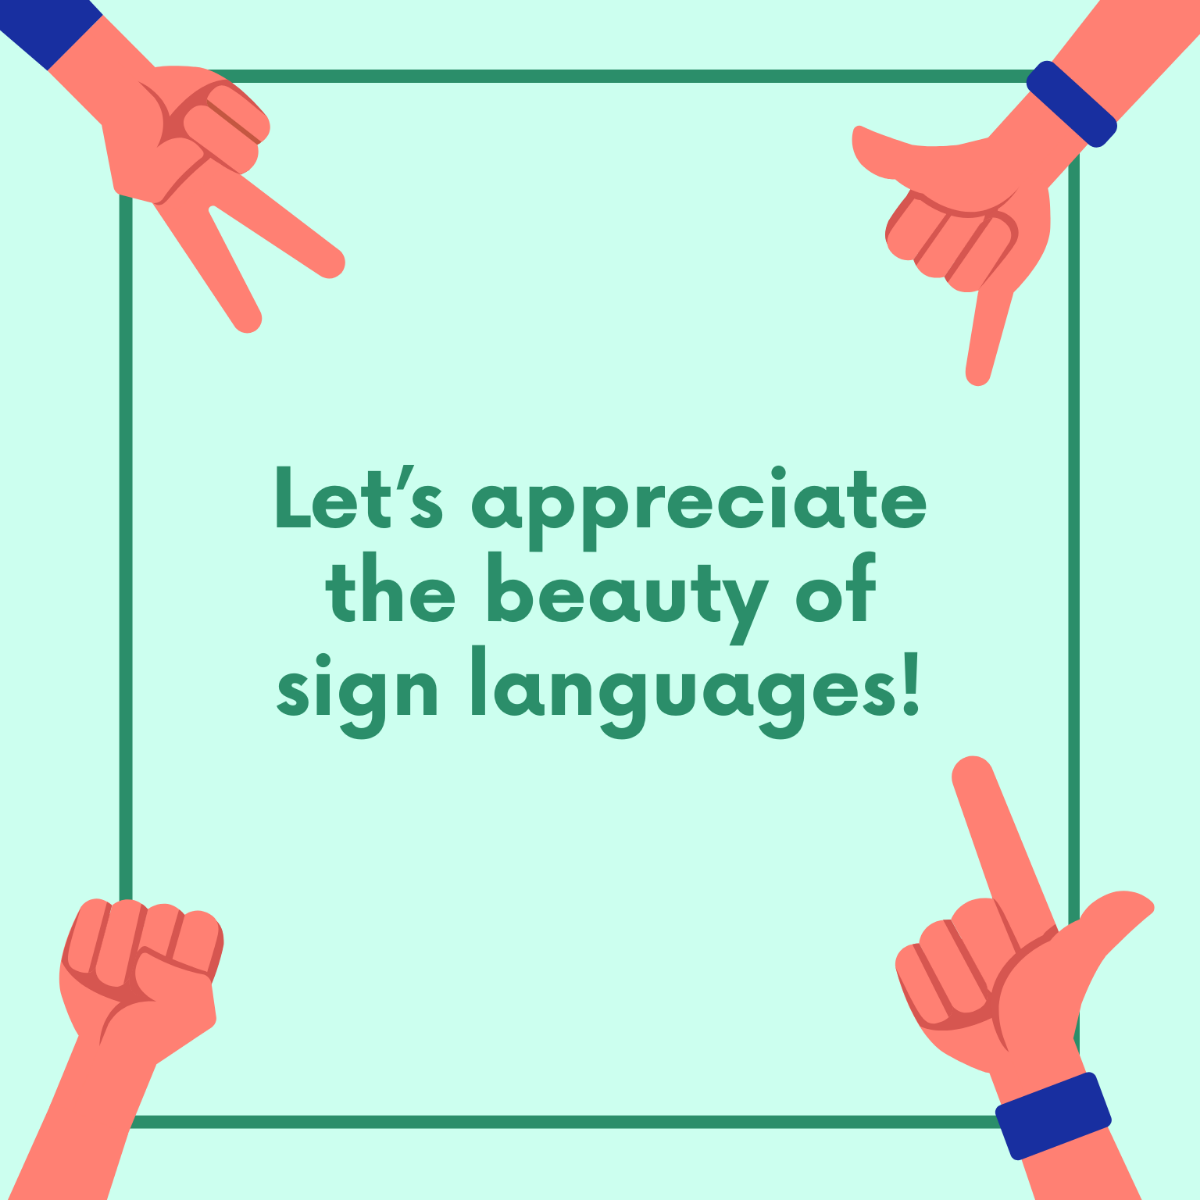 Free International Day of Sign Languages Greeting Card Vector Template